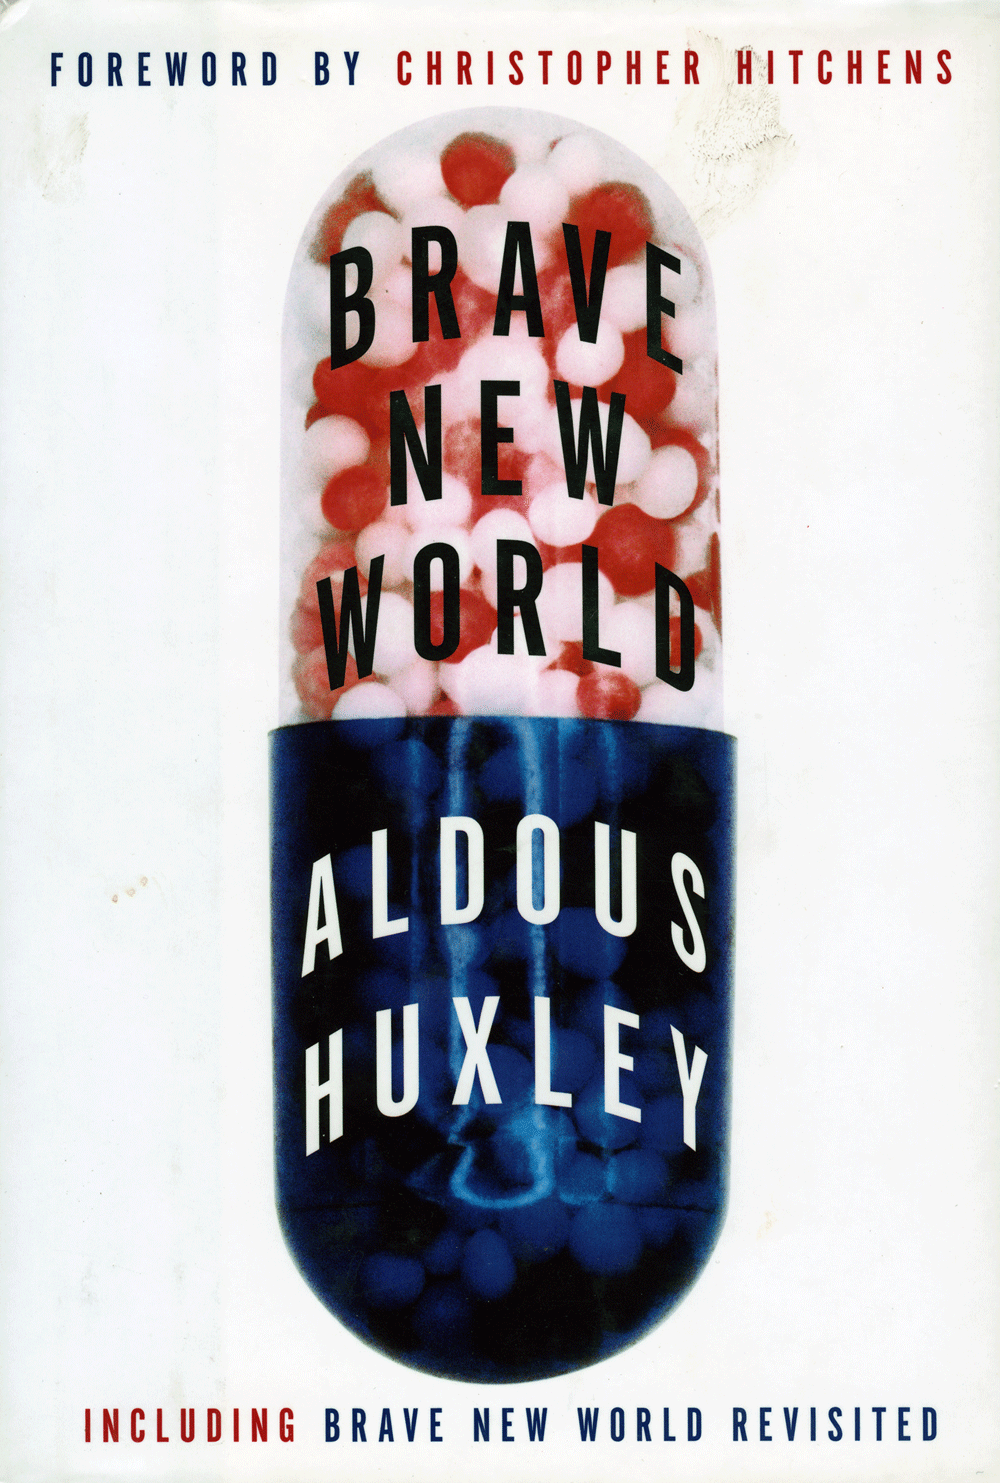 Book review on brave new world